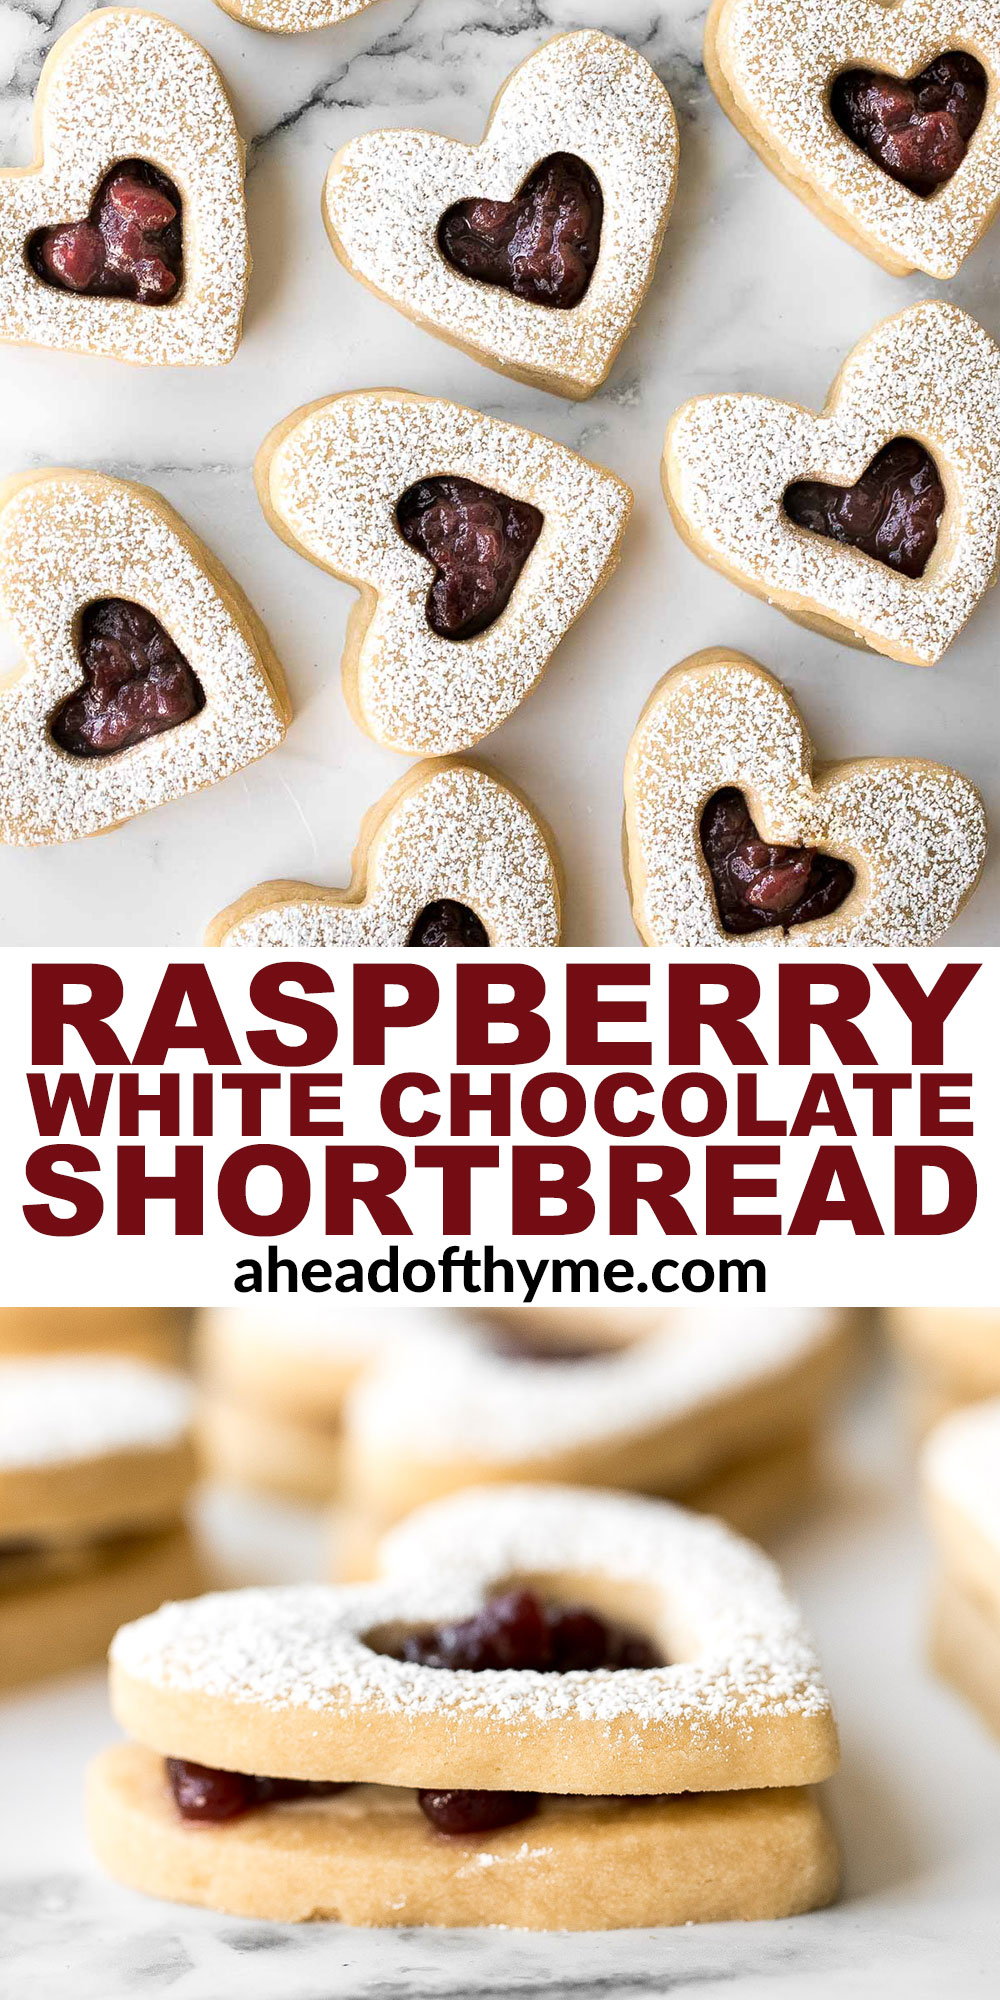 Raspberry and White Chocolate Shortbread Cookies